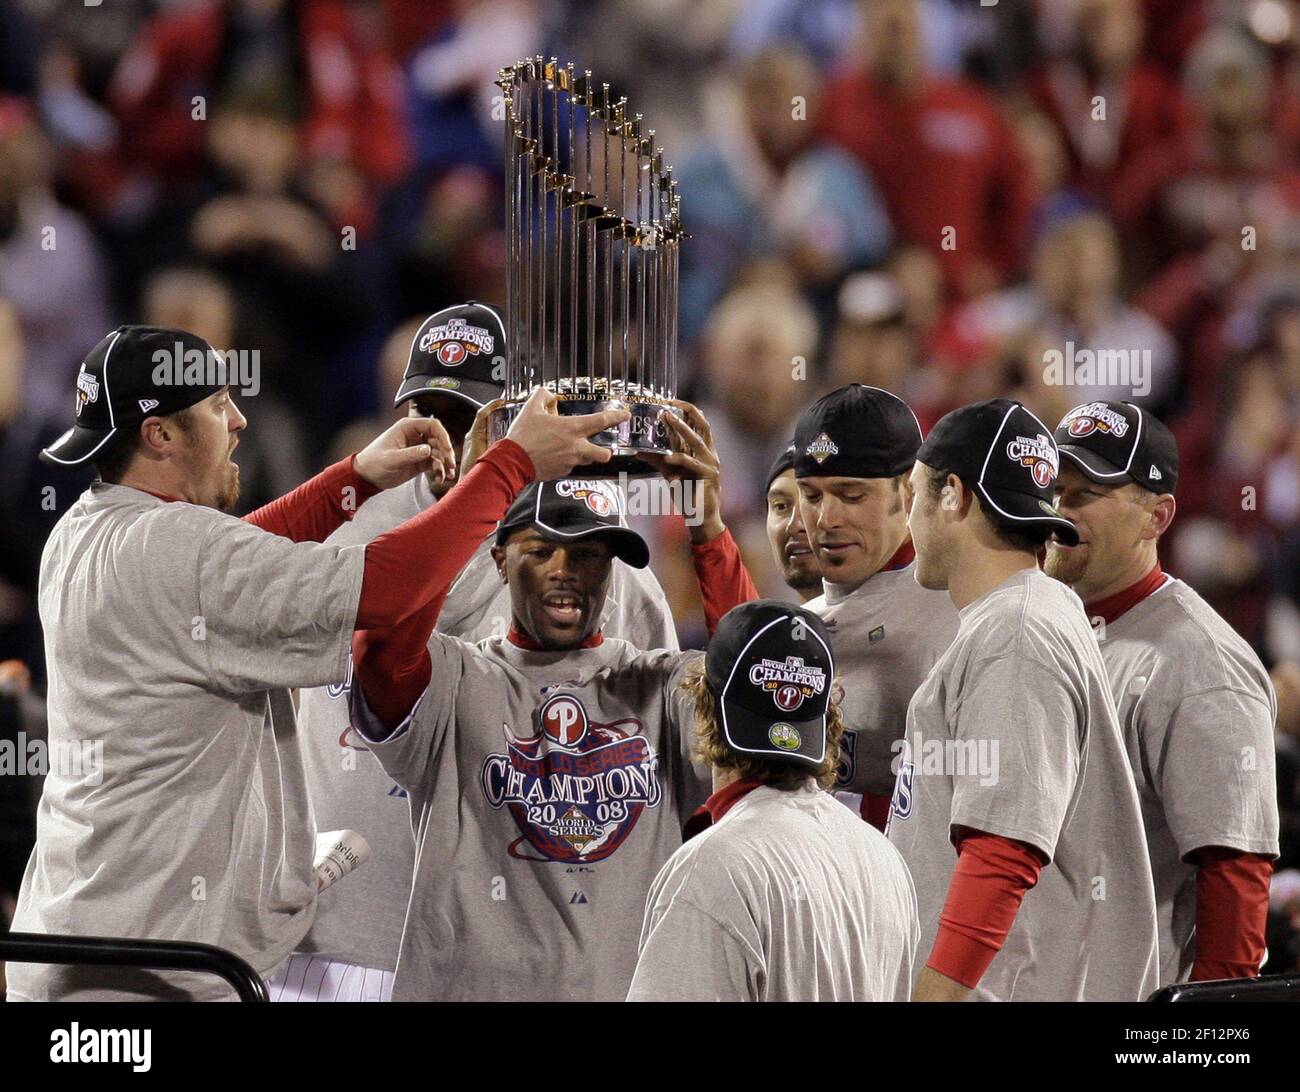 The Philadelphia Phillies' Jimmy Rollins holds up the World Series